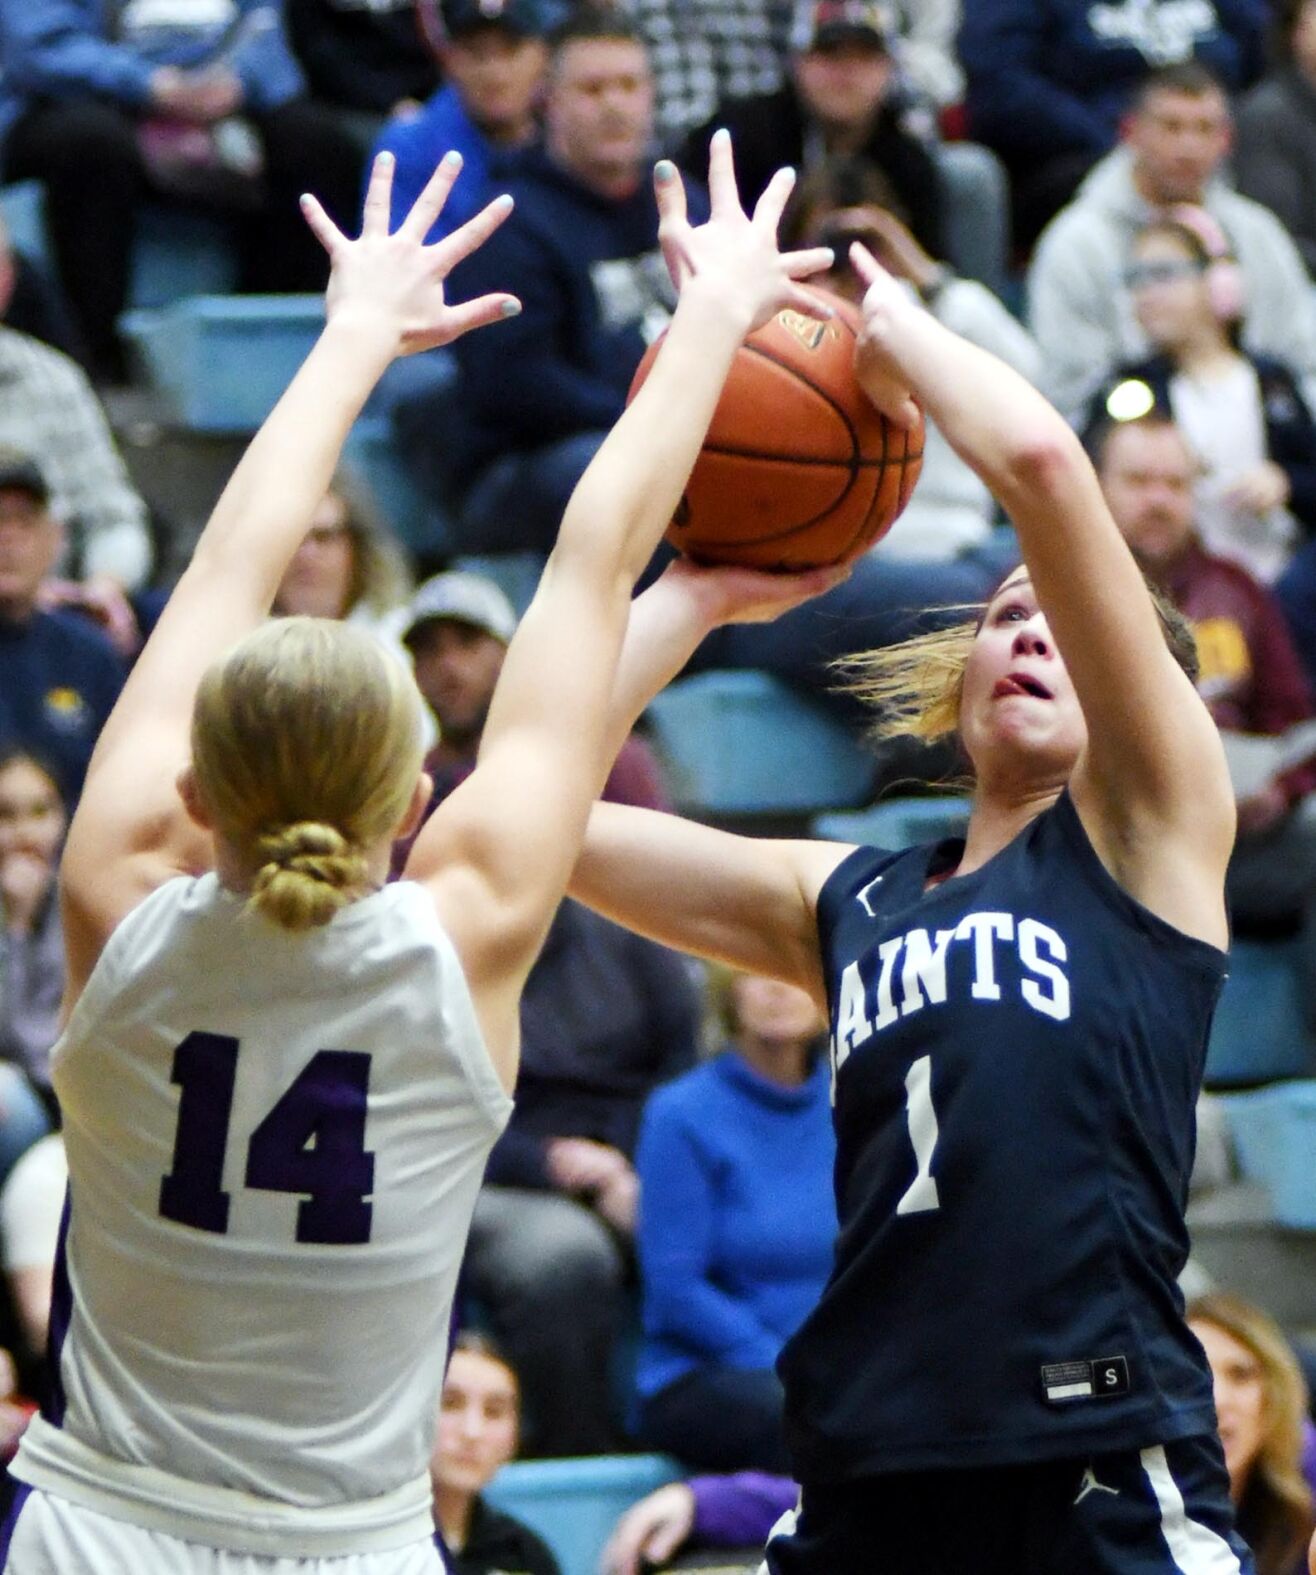 St. Peter vs. Marshall: Key Players and Exciting Matchup in Section 2AAA Title Clash